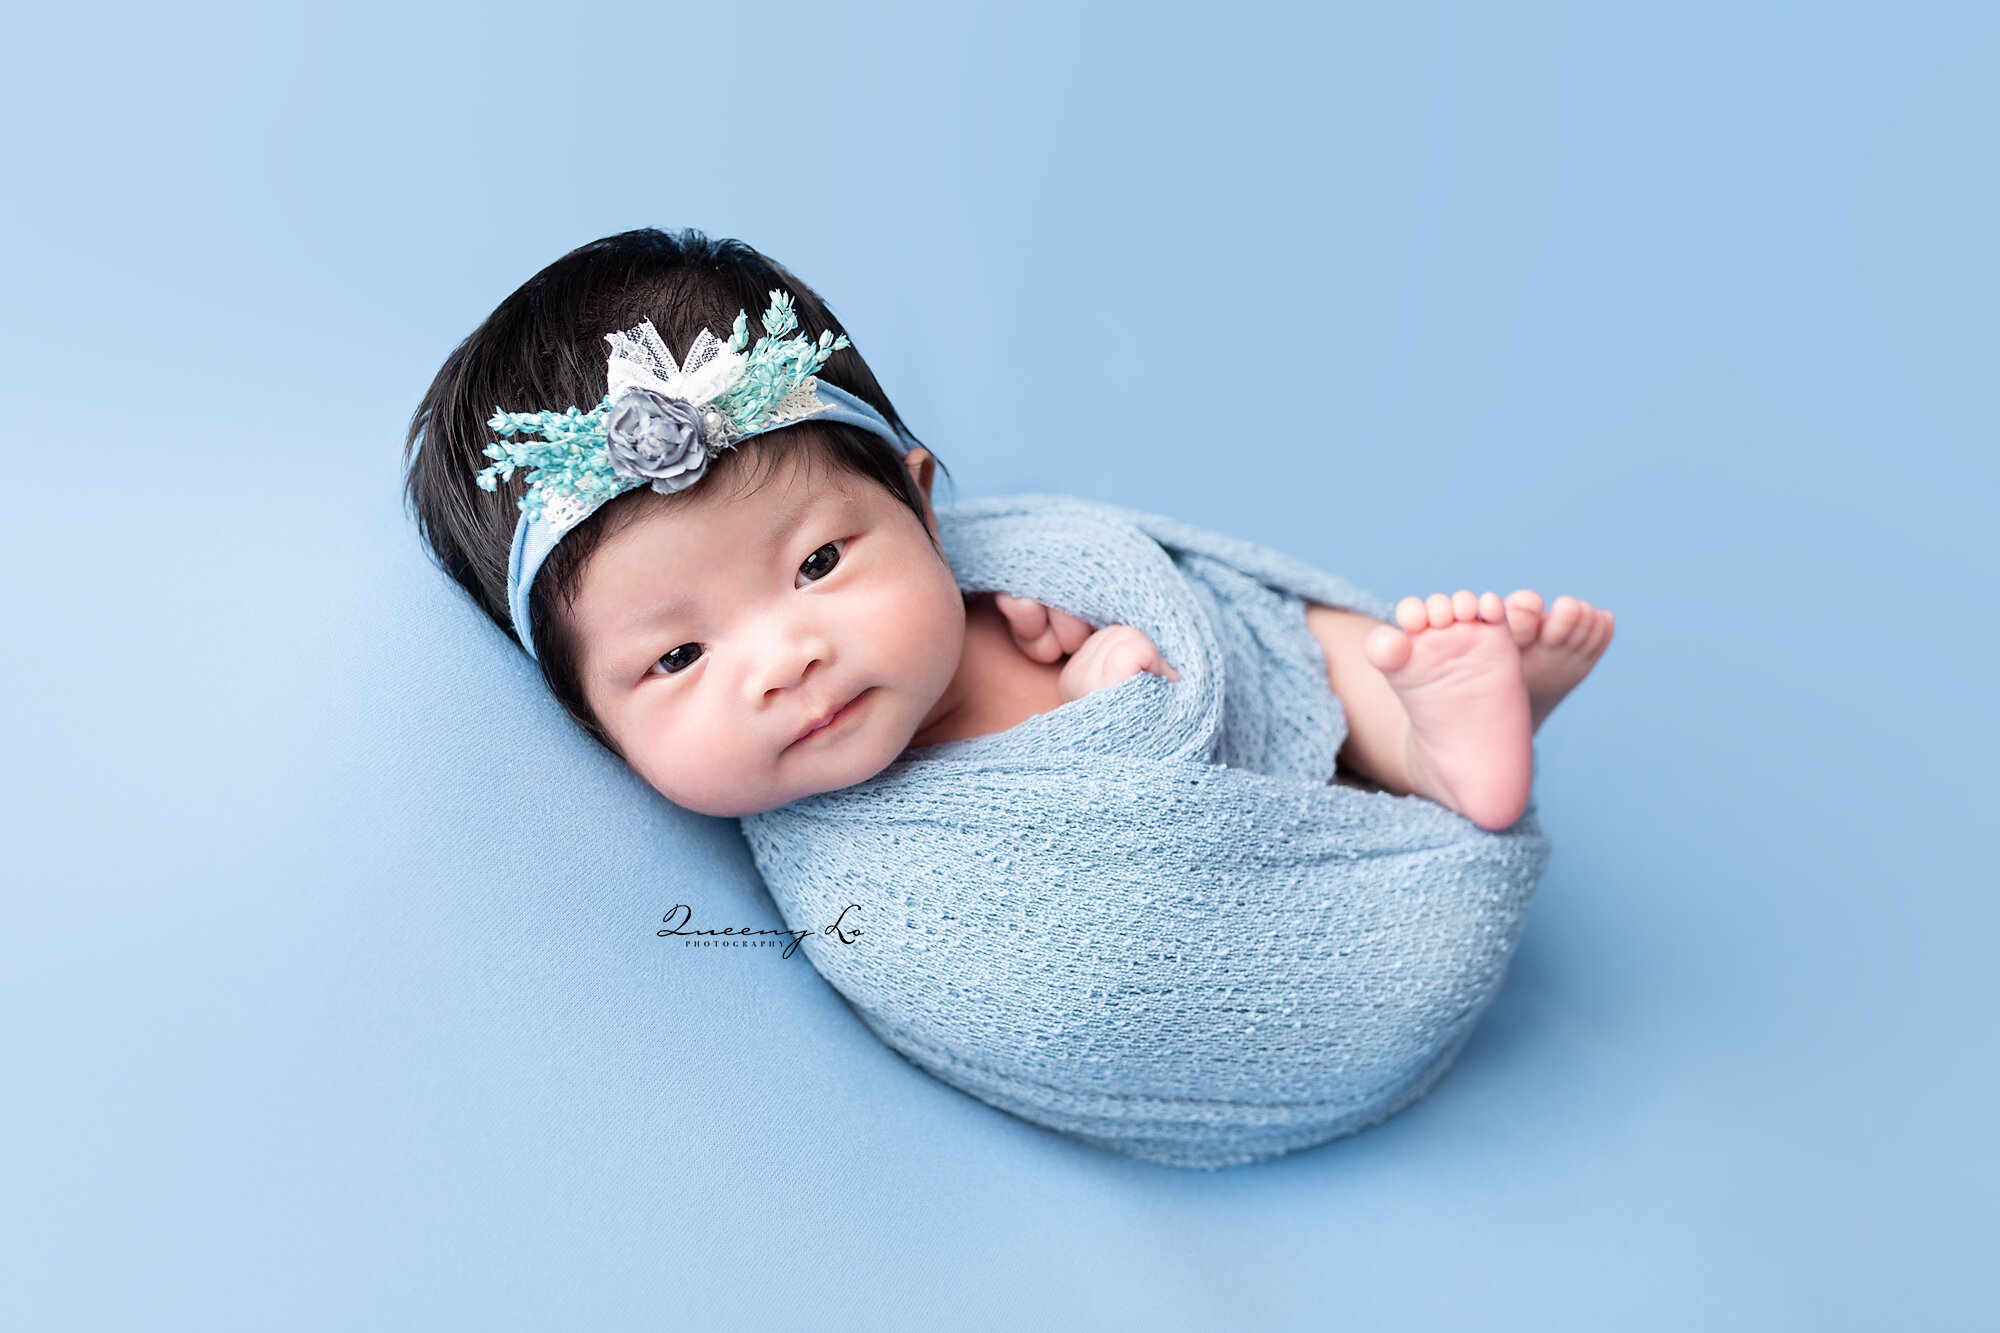 Most parents tend to choose more of a neutral or &quot;girly&quot; colors for girls.  But this girl rocked this blue!  Girls in blue are so special! 💙
.
.
.
 #girlsinblue💙 #babygirl #newborngirl #newborngirlsession #newborngirlphotography #newbornp